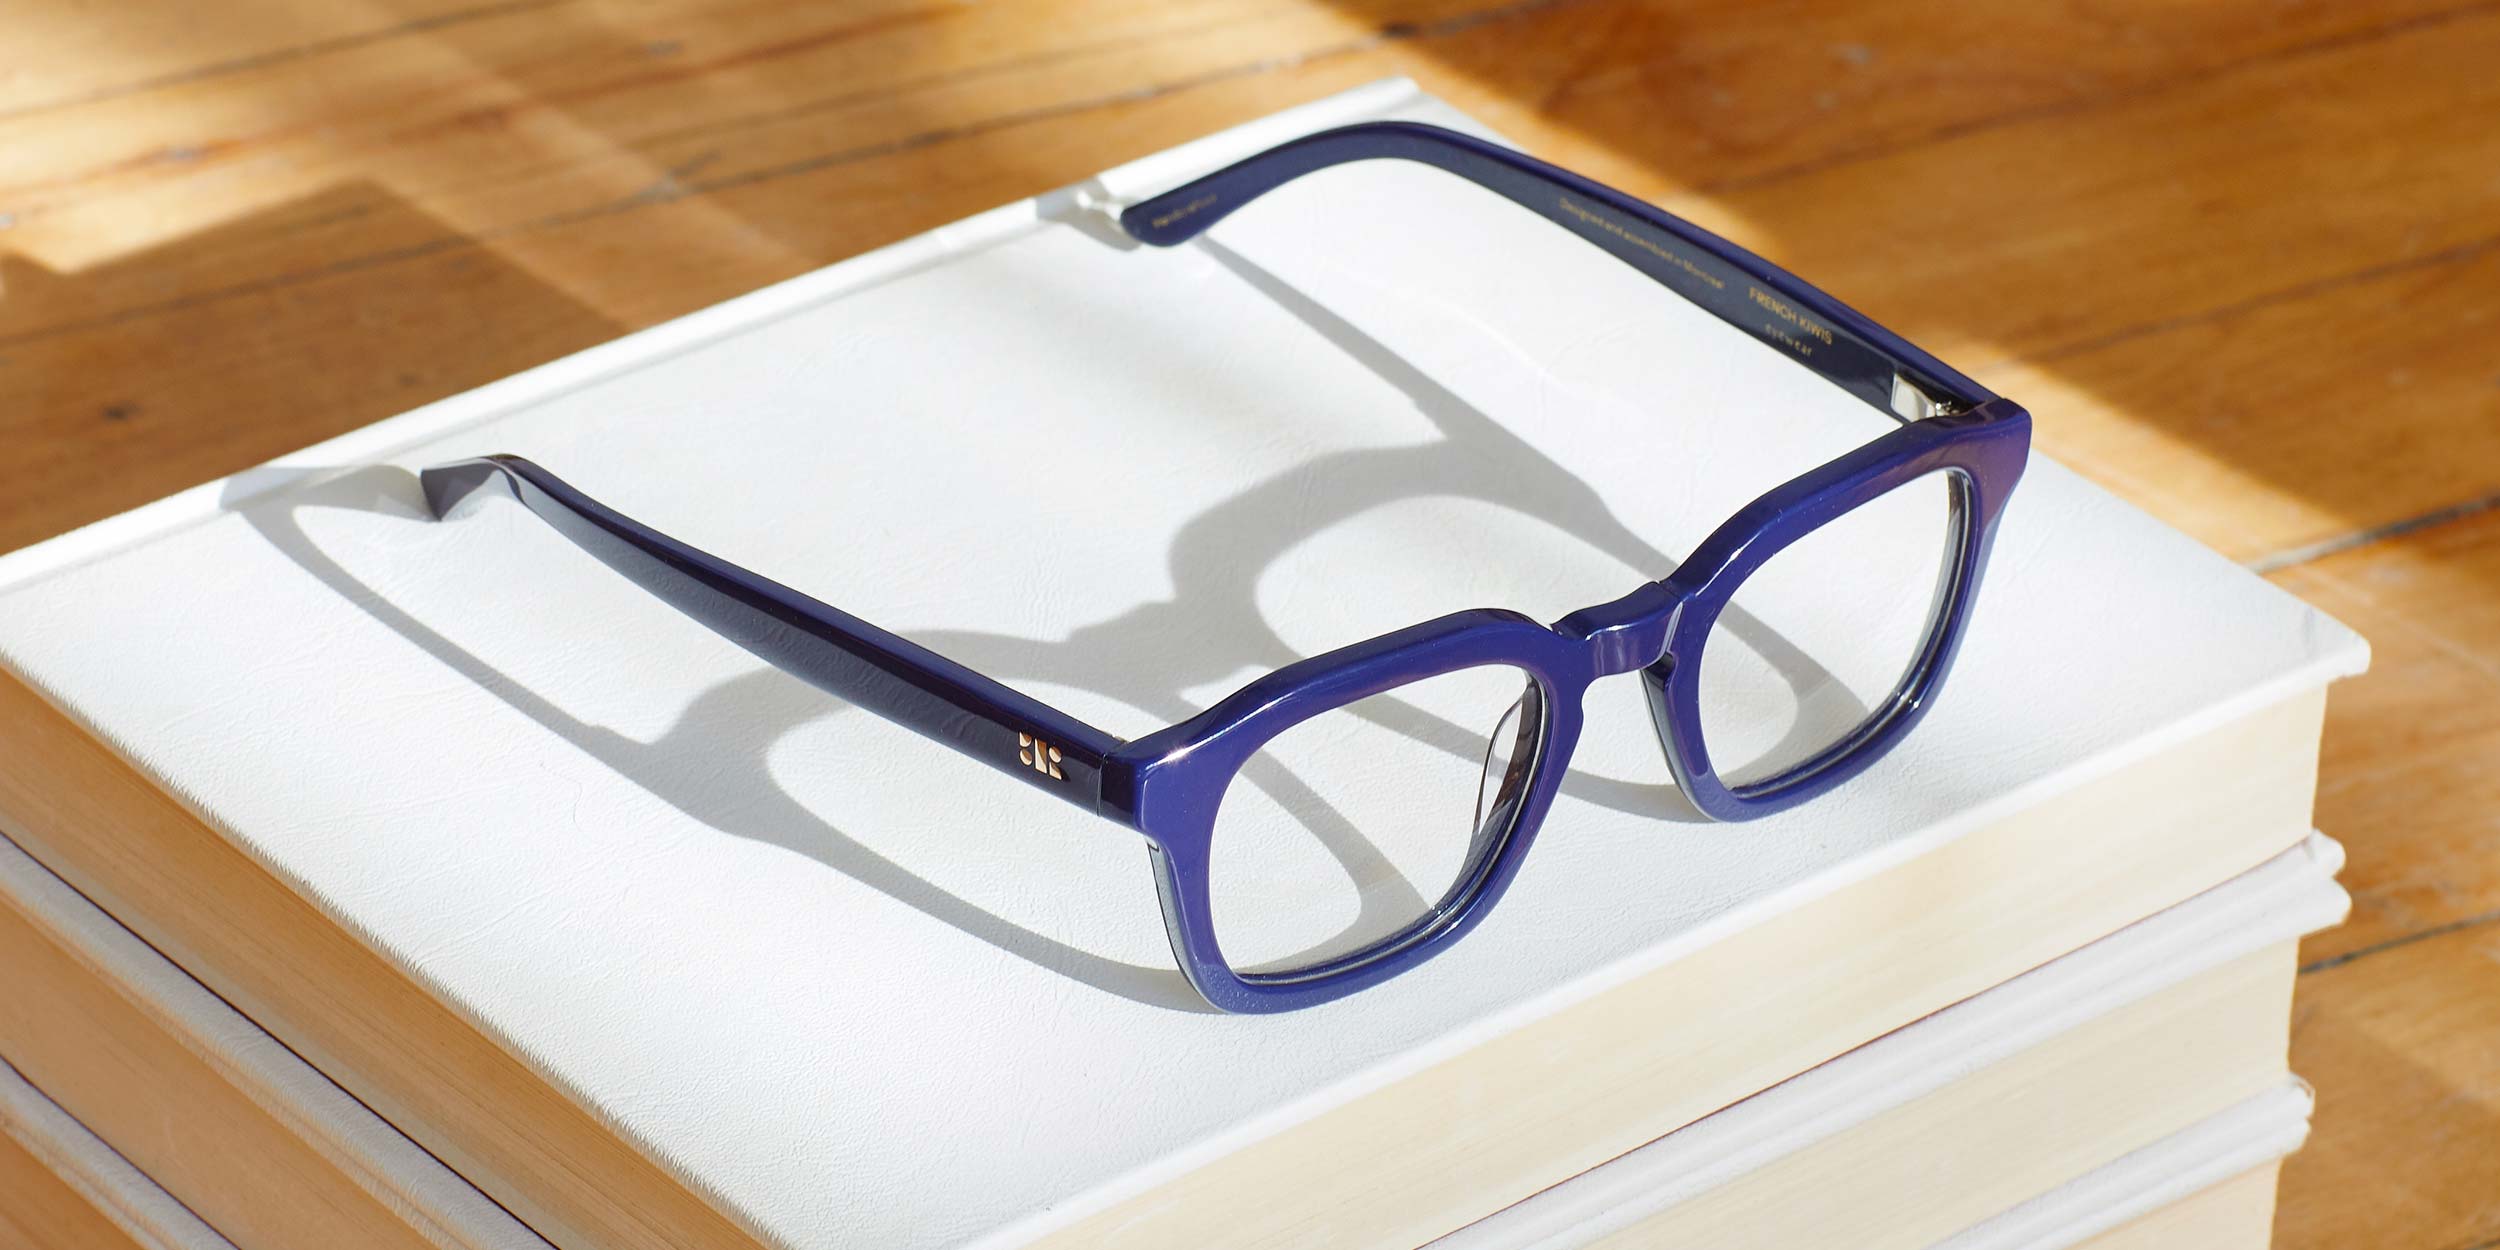 Photo Details of Oscar Tortoise Reading Glasses in a room